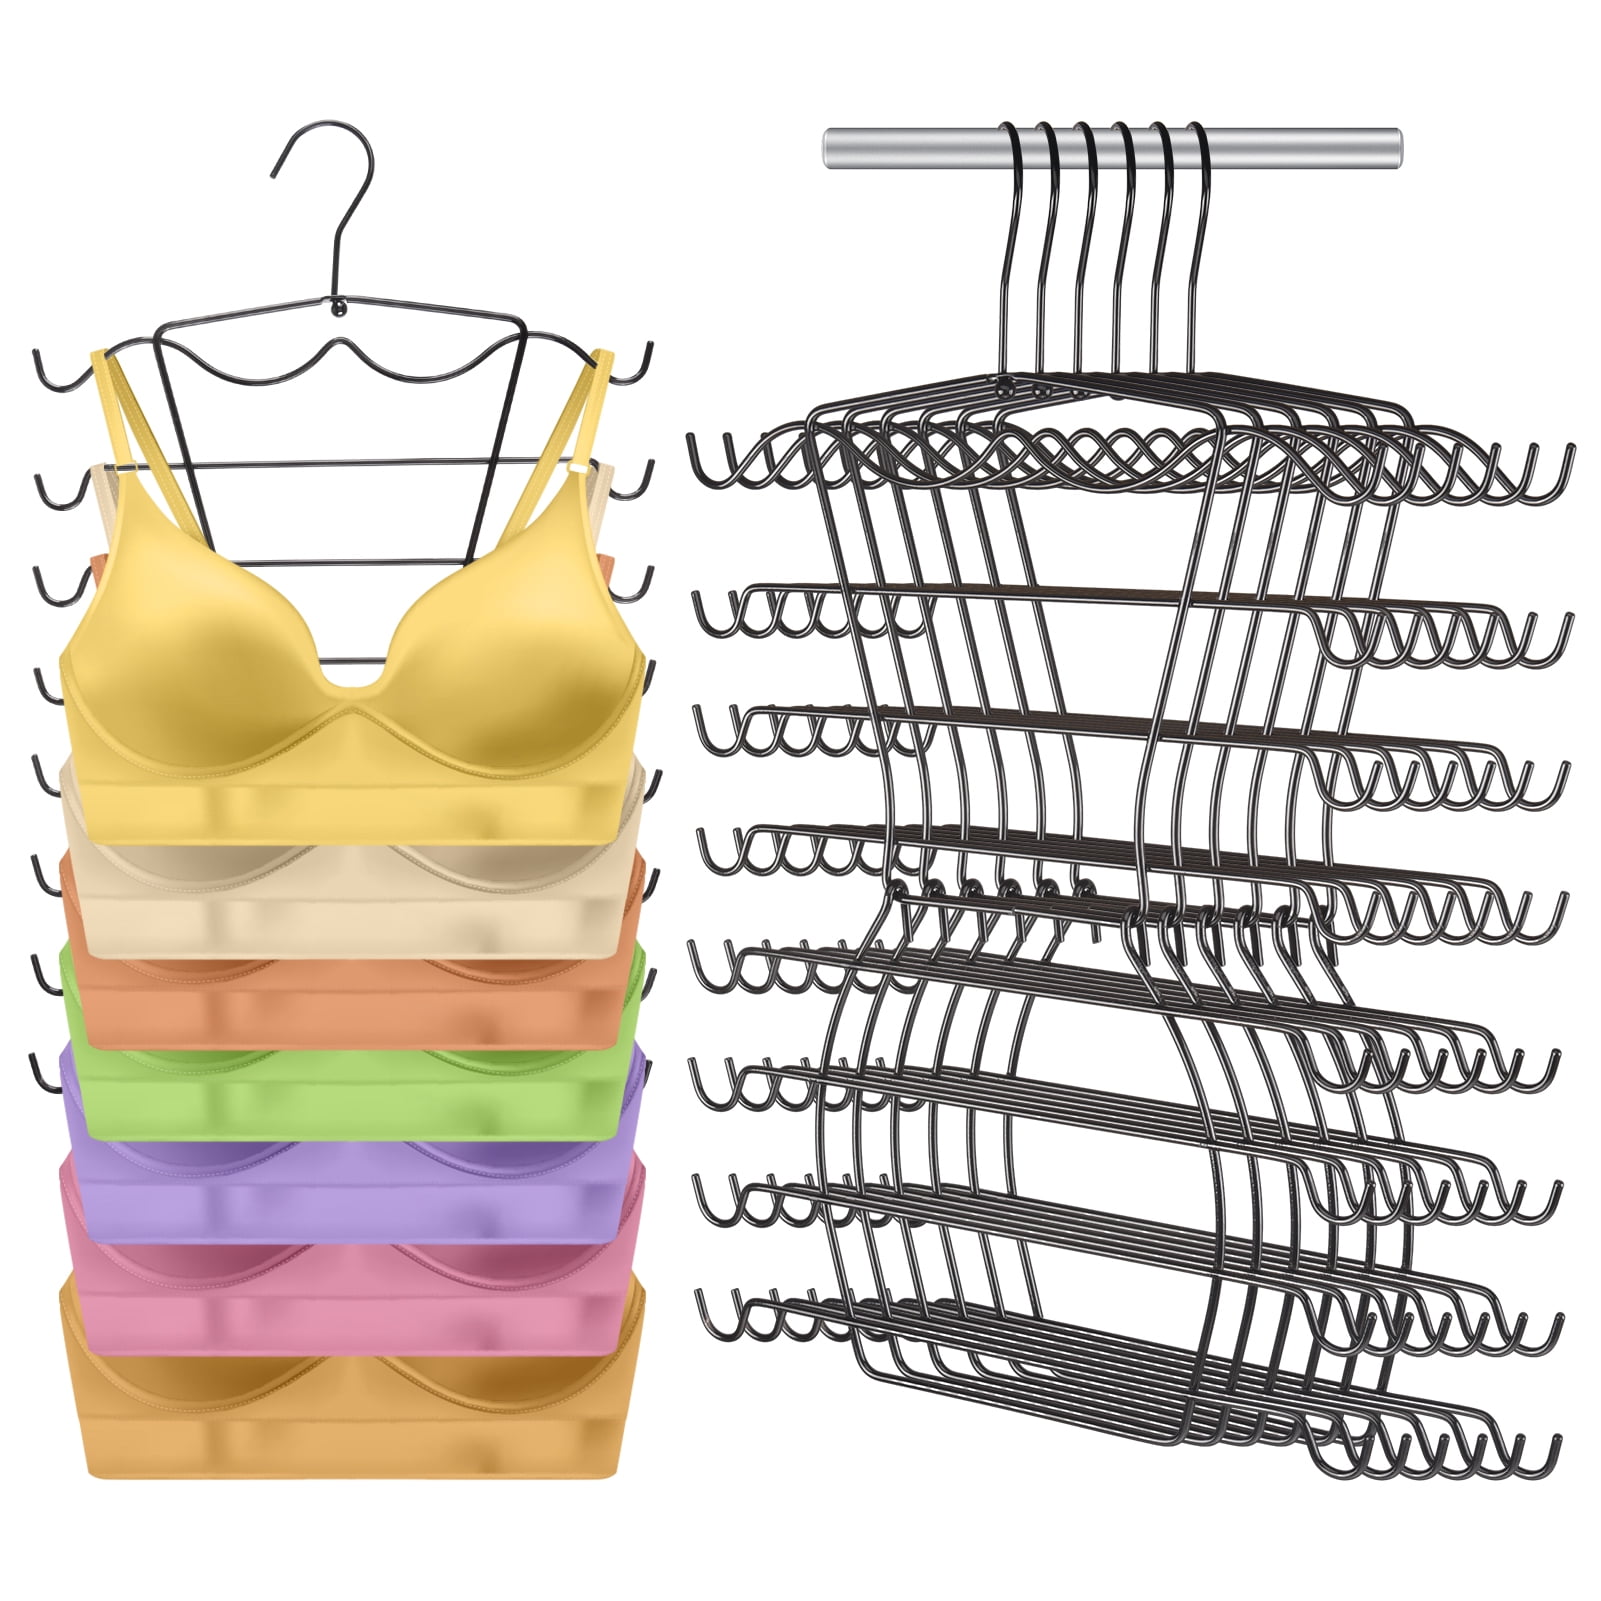 Organize It All 1363w-6 Chrome Finished Hangers - 8 count